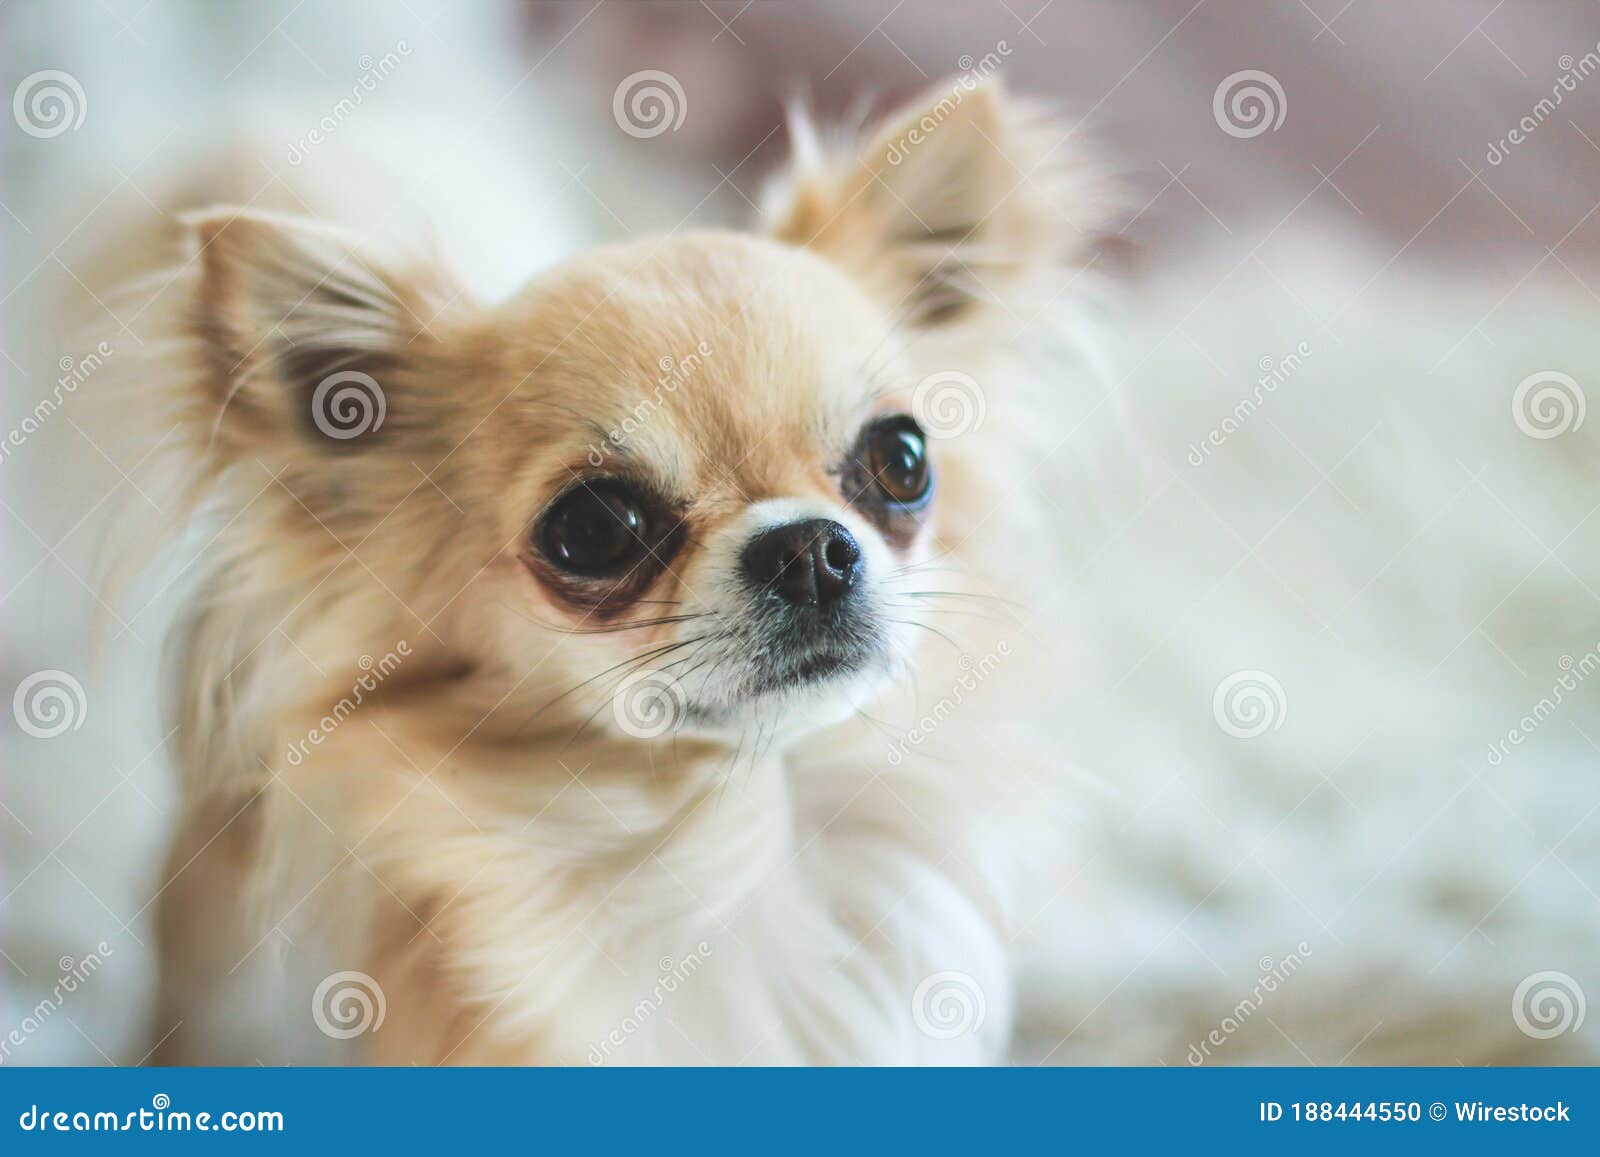 Closeup Of A Longhaired Chihuahua With Tear Stains